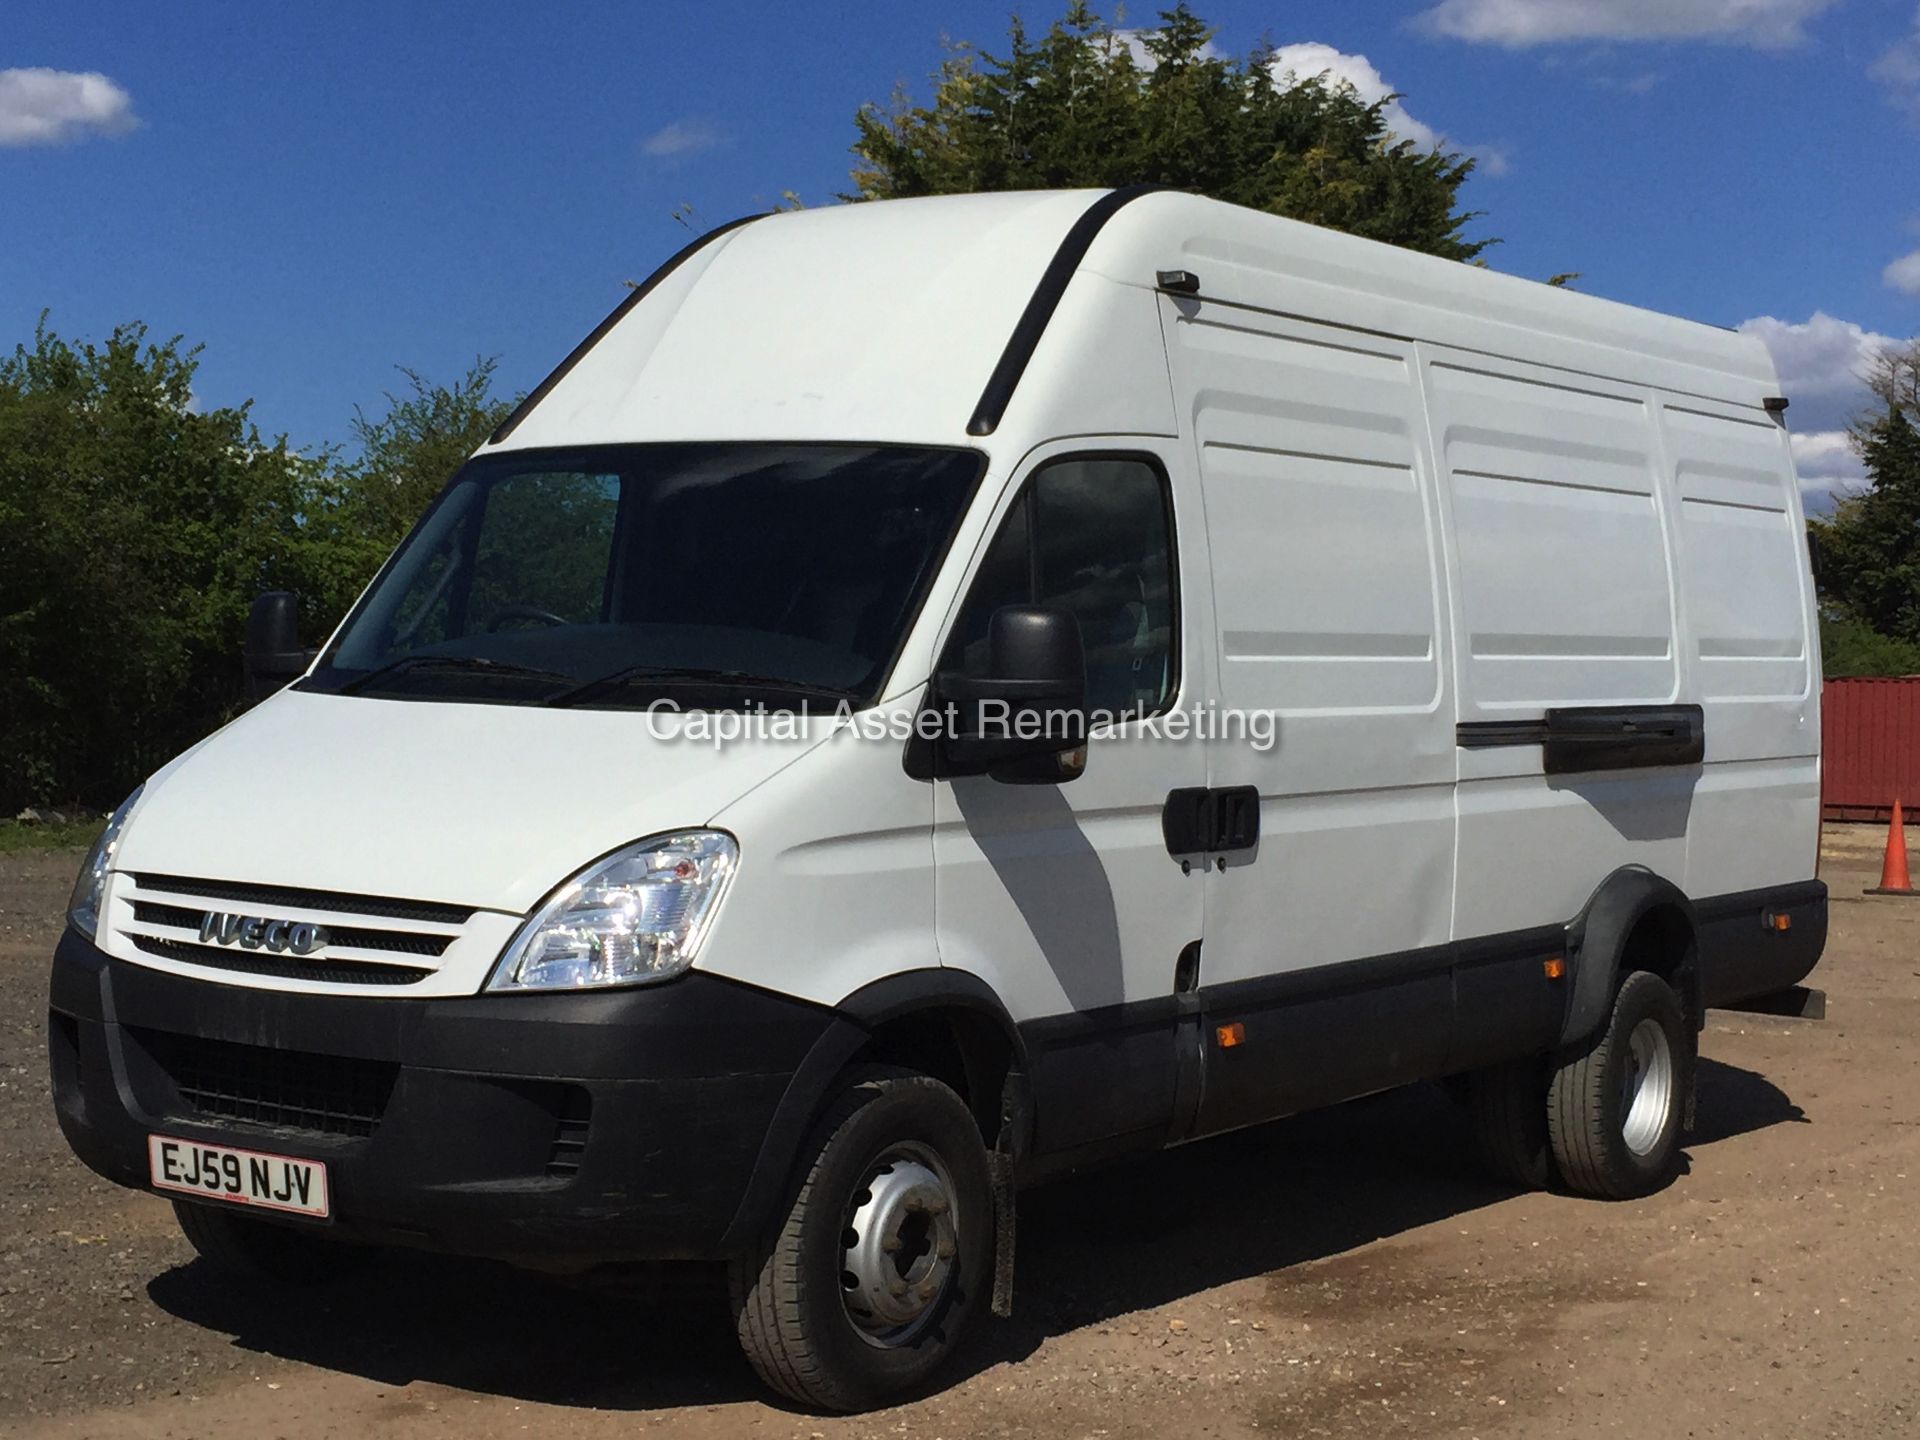 IVECO DAILY 65C18 3.0 HPT (2009 - 59 REG) LWB HI-ROOF  **1 OWNER FROM NEW - LOW MILES** - Image 3 of 19